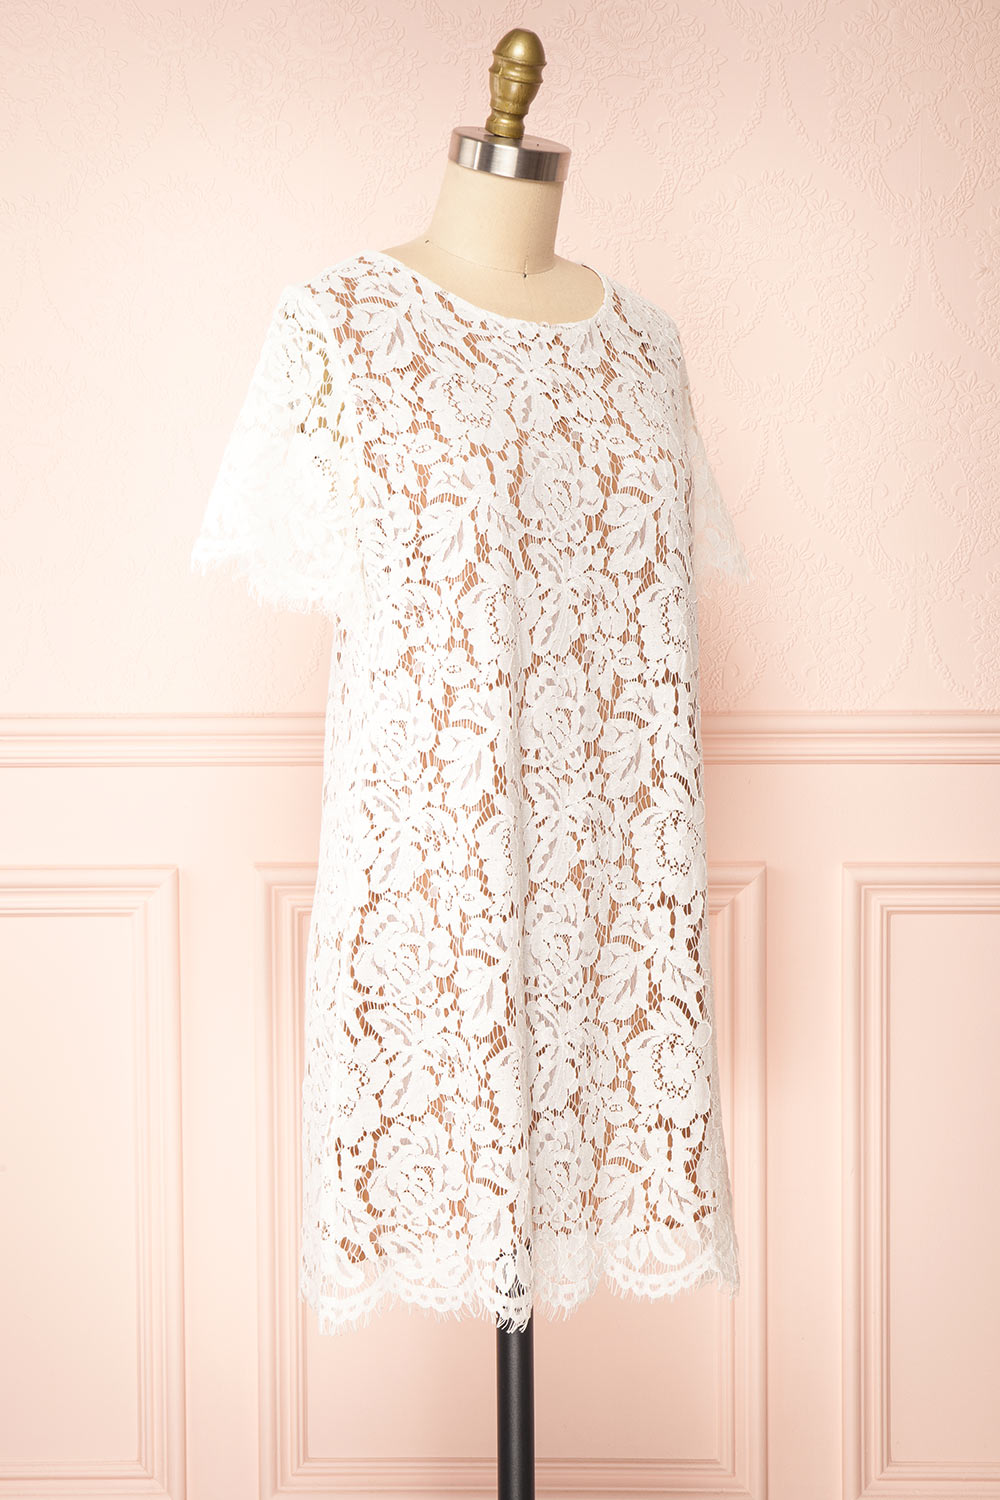 Apama White Floral Lace Short Sleeve Dress | Boutique 1861 side view